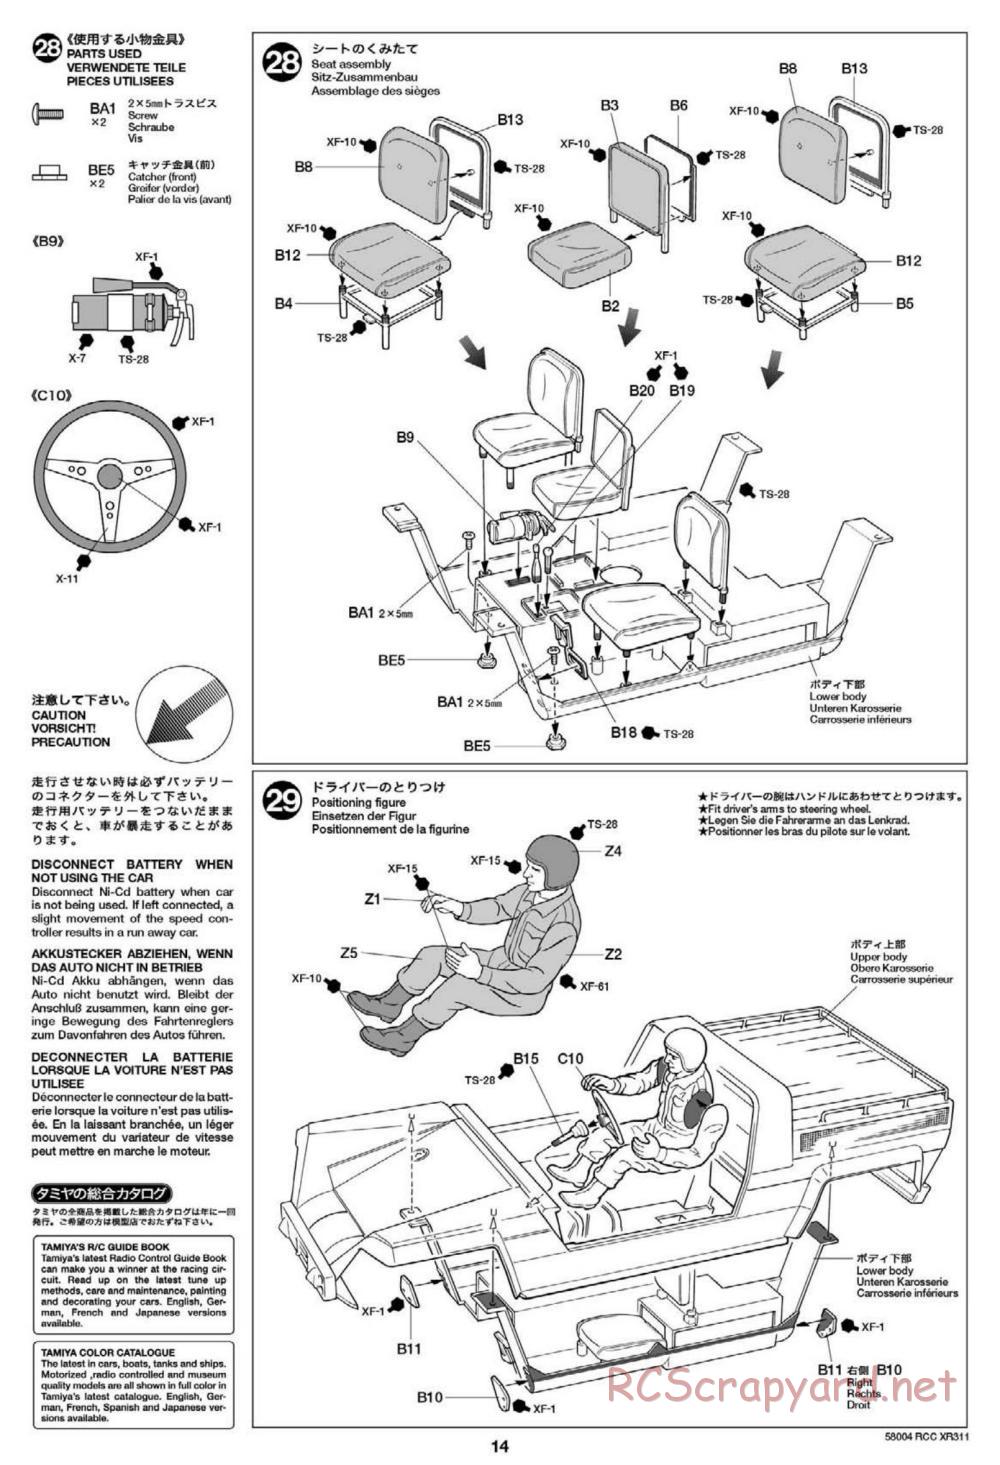 Tamiya - XR311 Combat Support Vehicle (2012) Chassis - Manual - Page 14